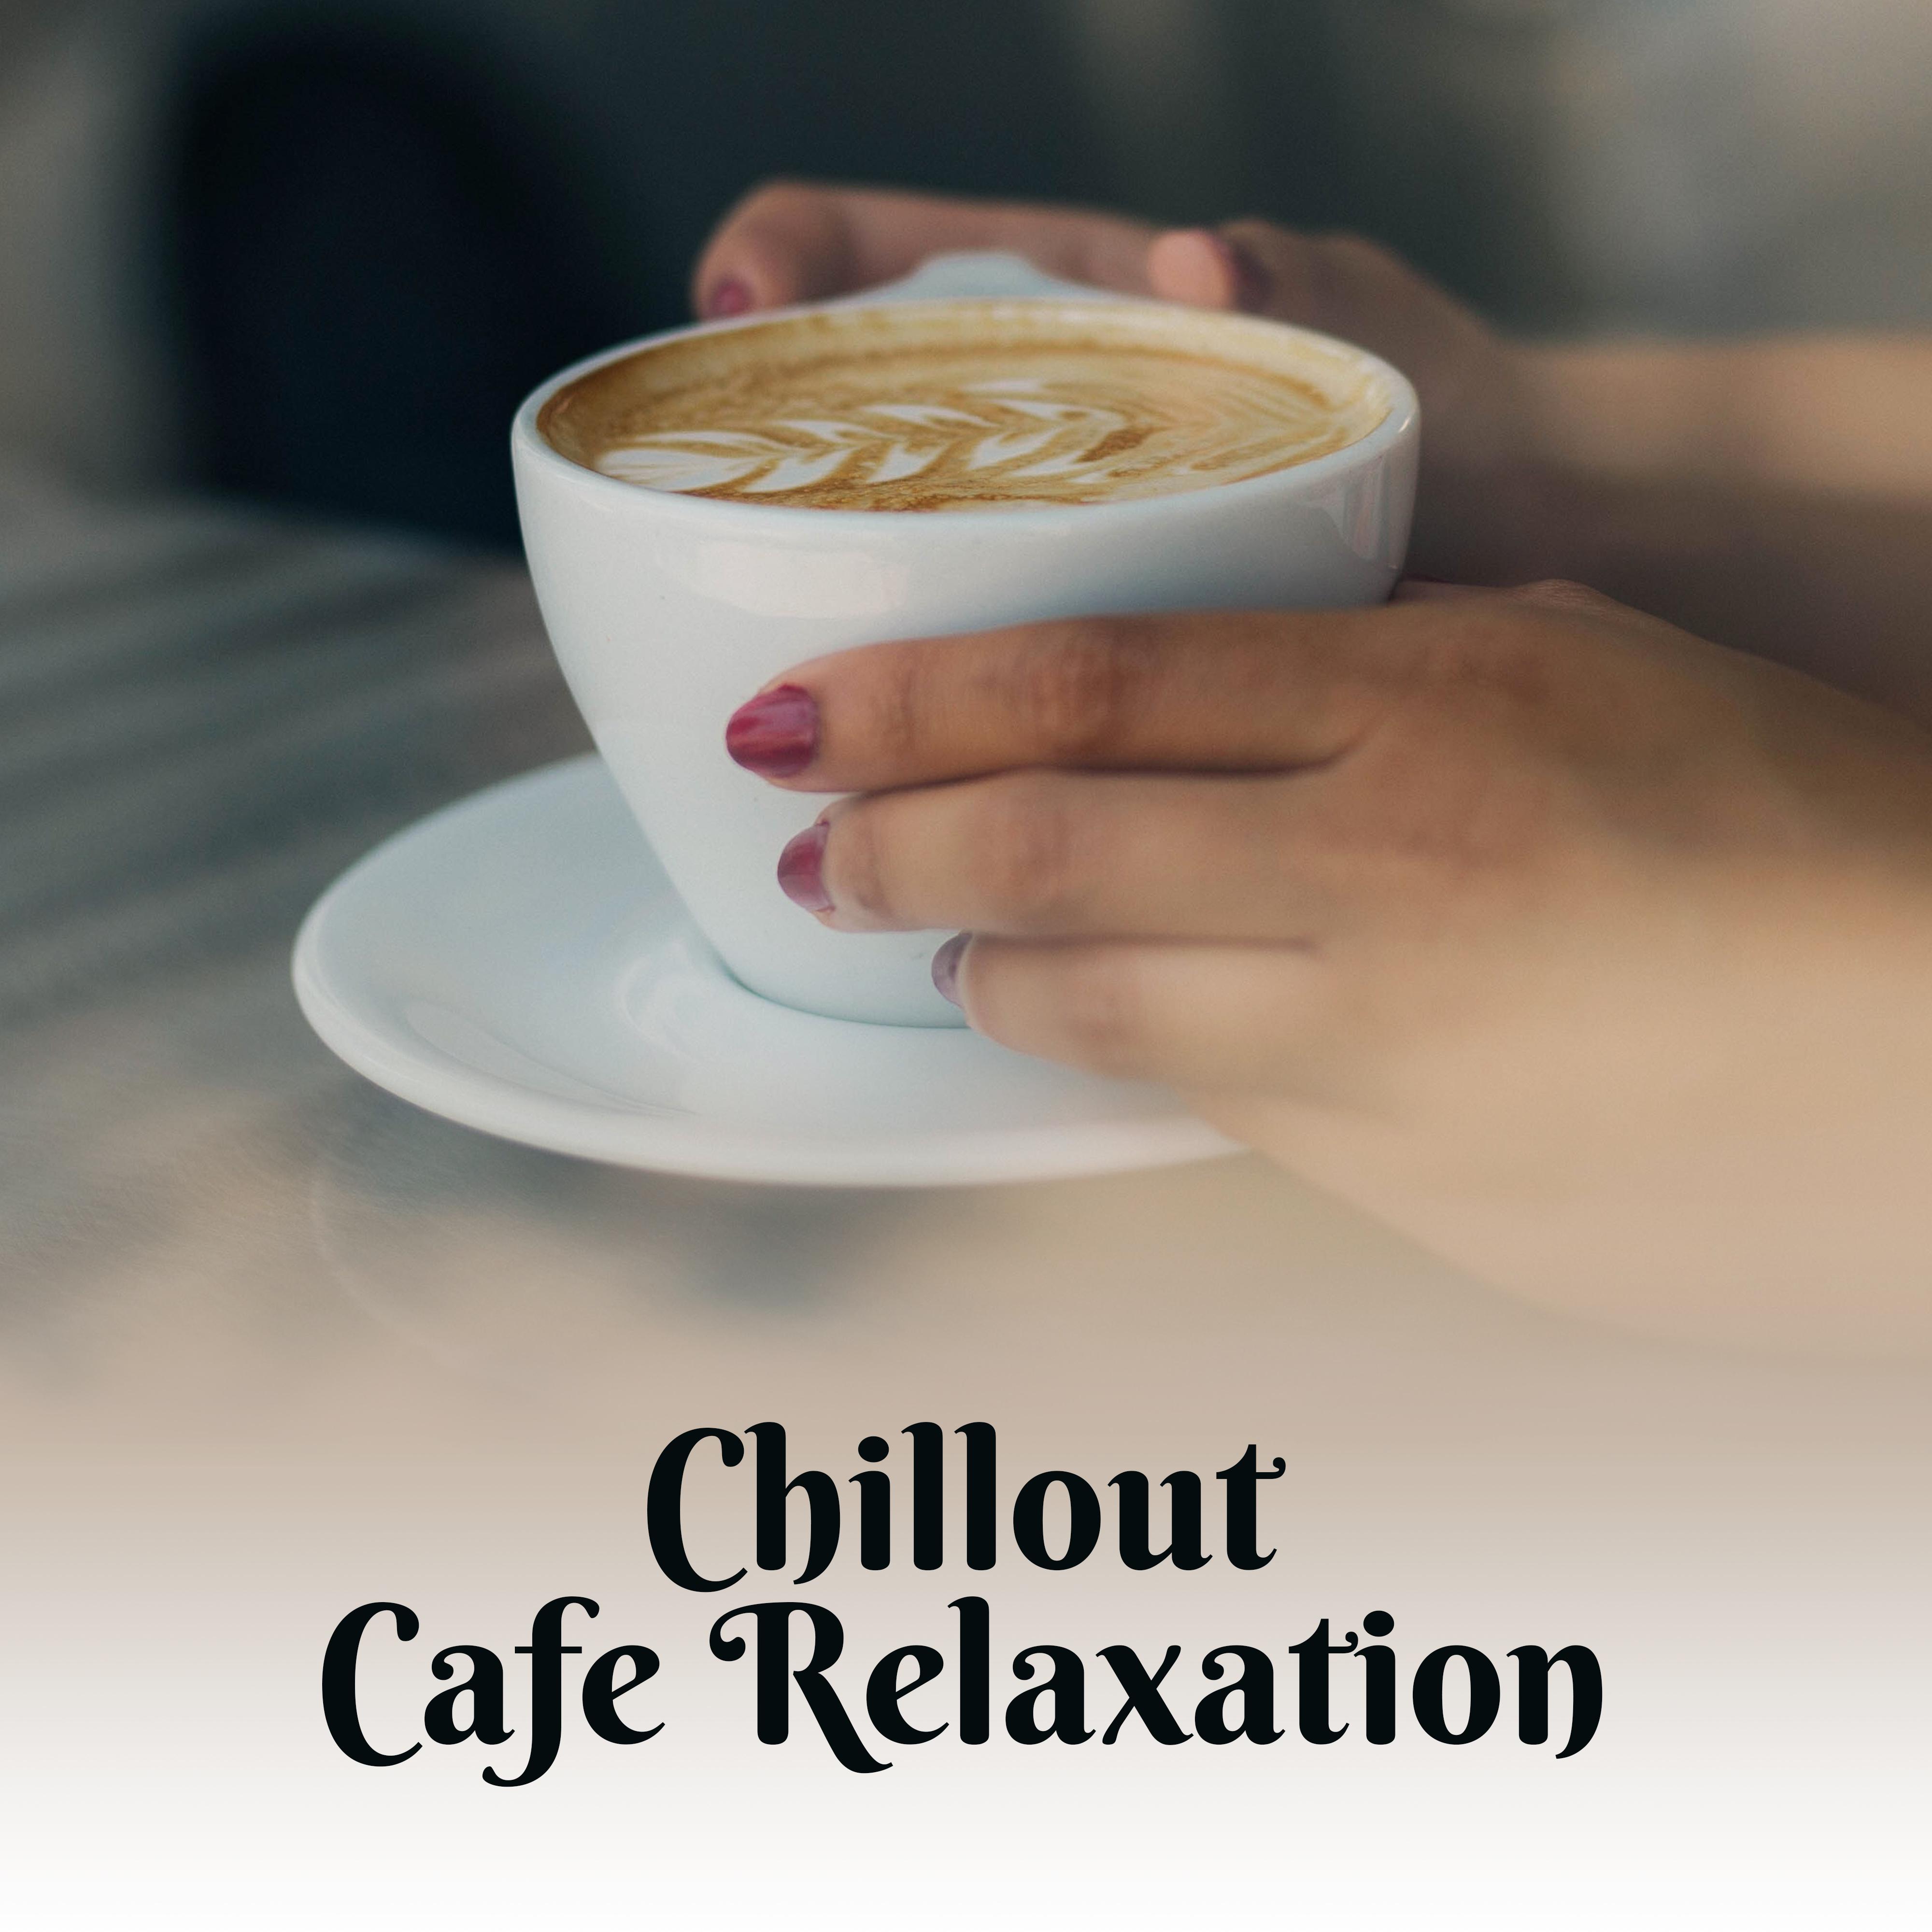 Chillout Cafe Relaxation – Beach Cafe Restaurant, Summer Lounge, Chill Out Beats, Holiday Music